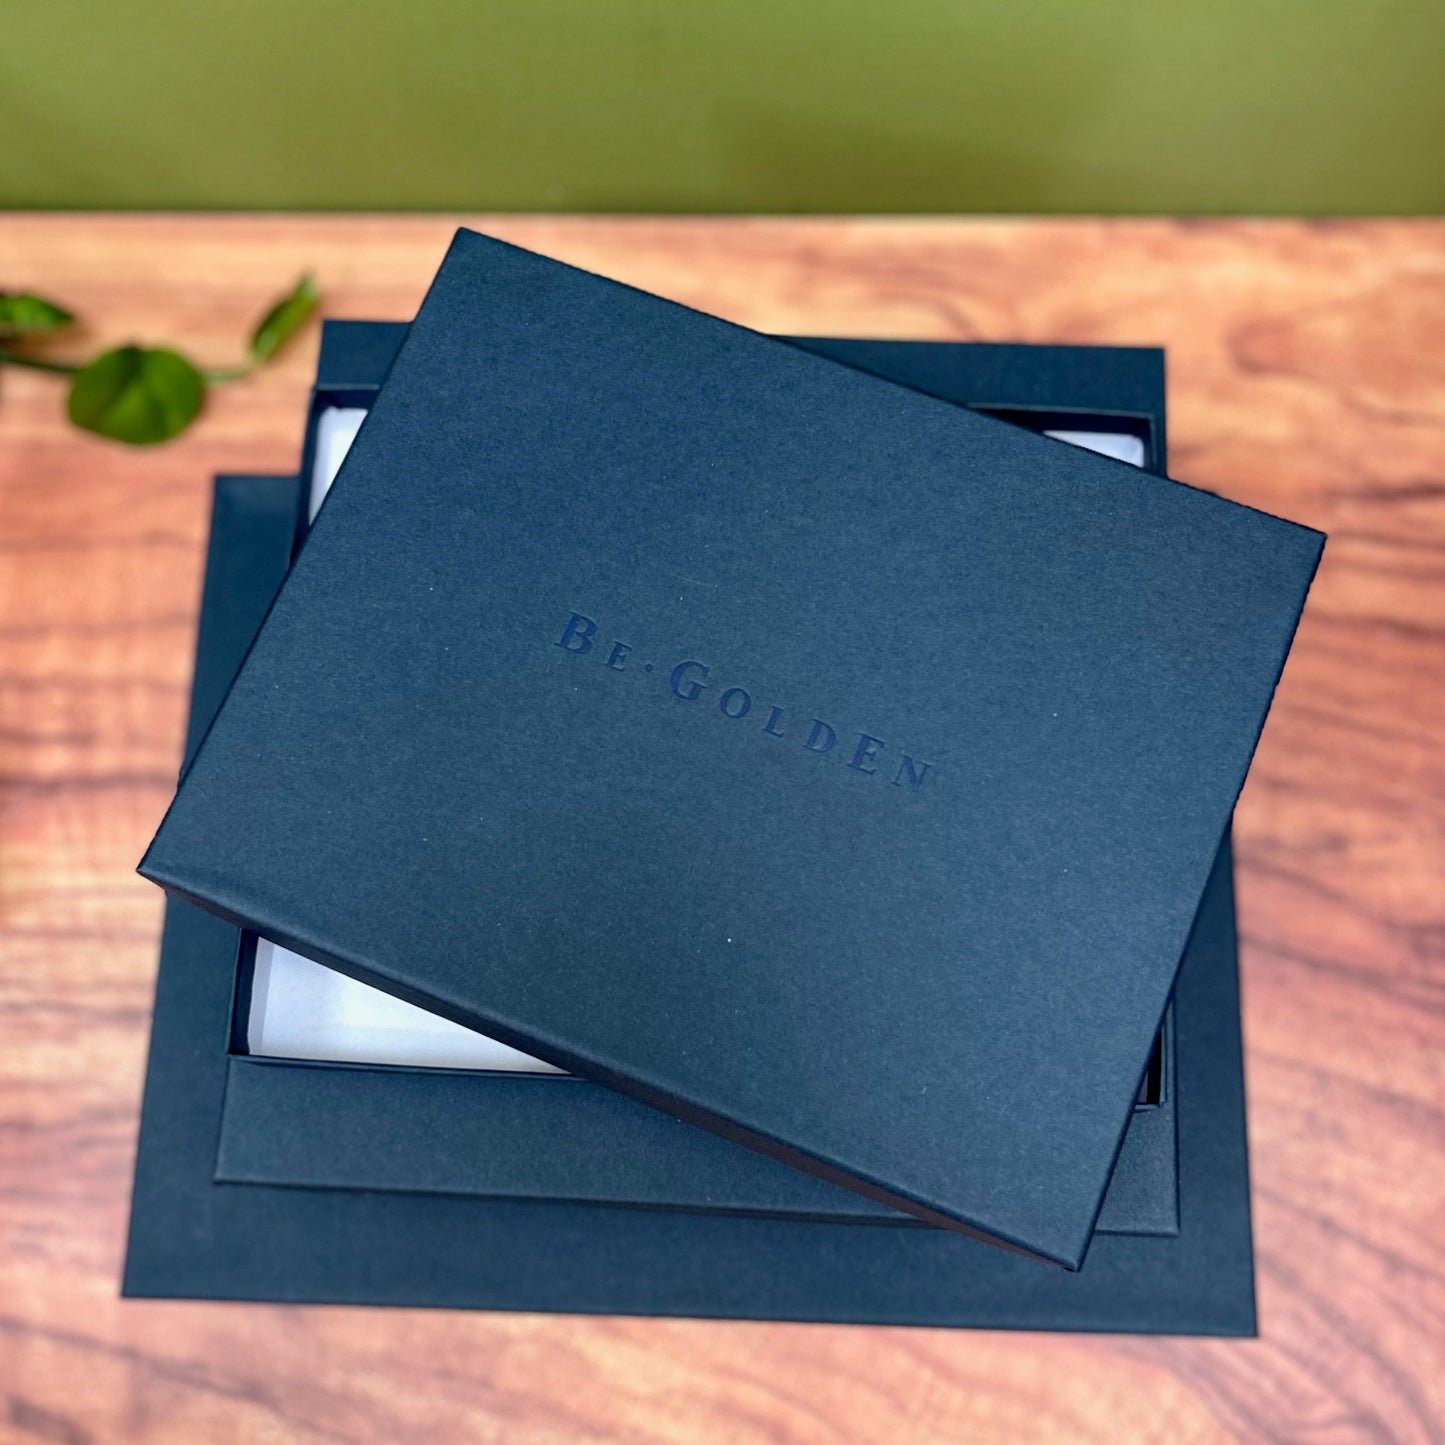 a pile of blue presentation boxes are on a table and they have been embossed with the company name begolden on the front